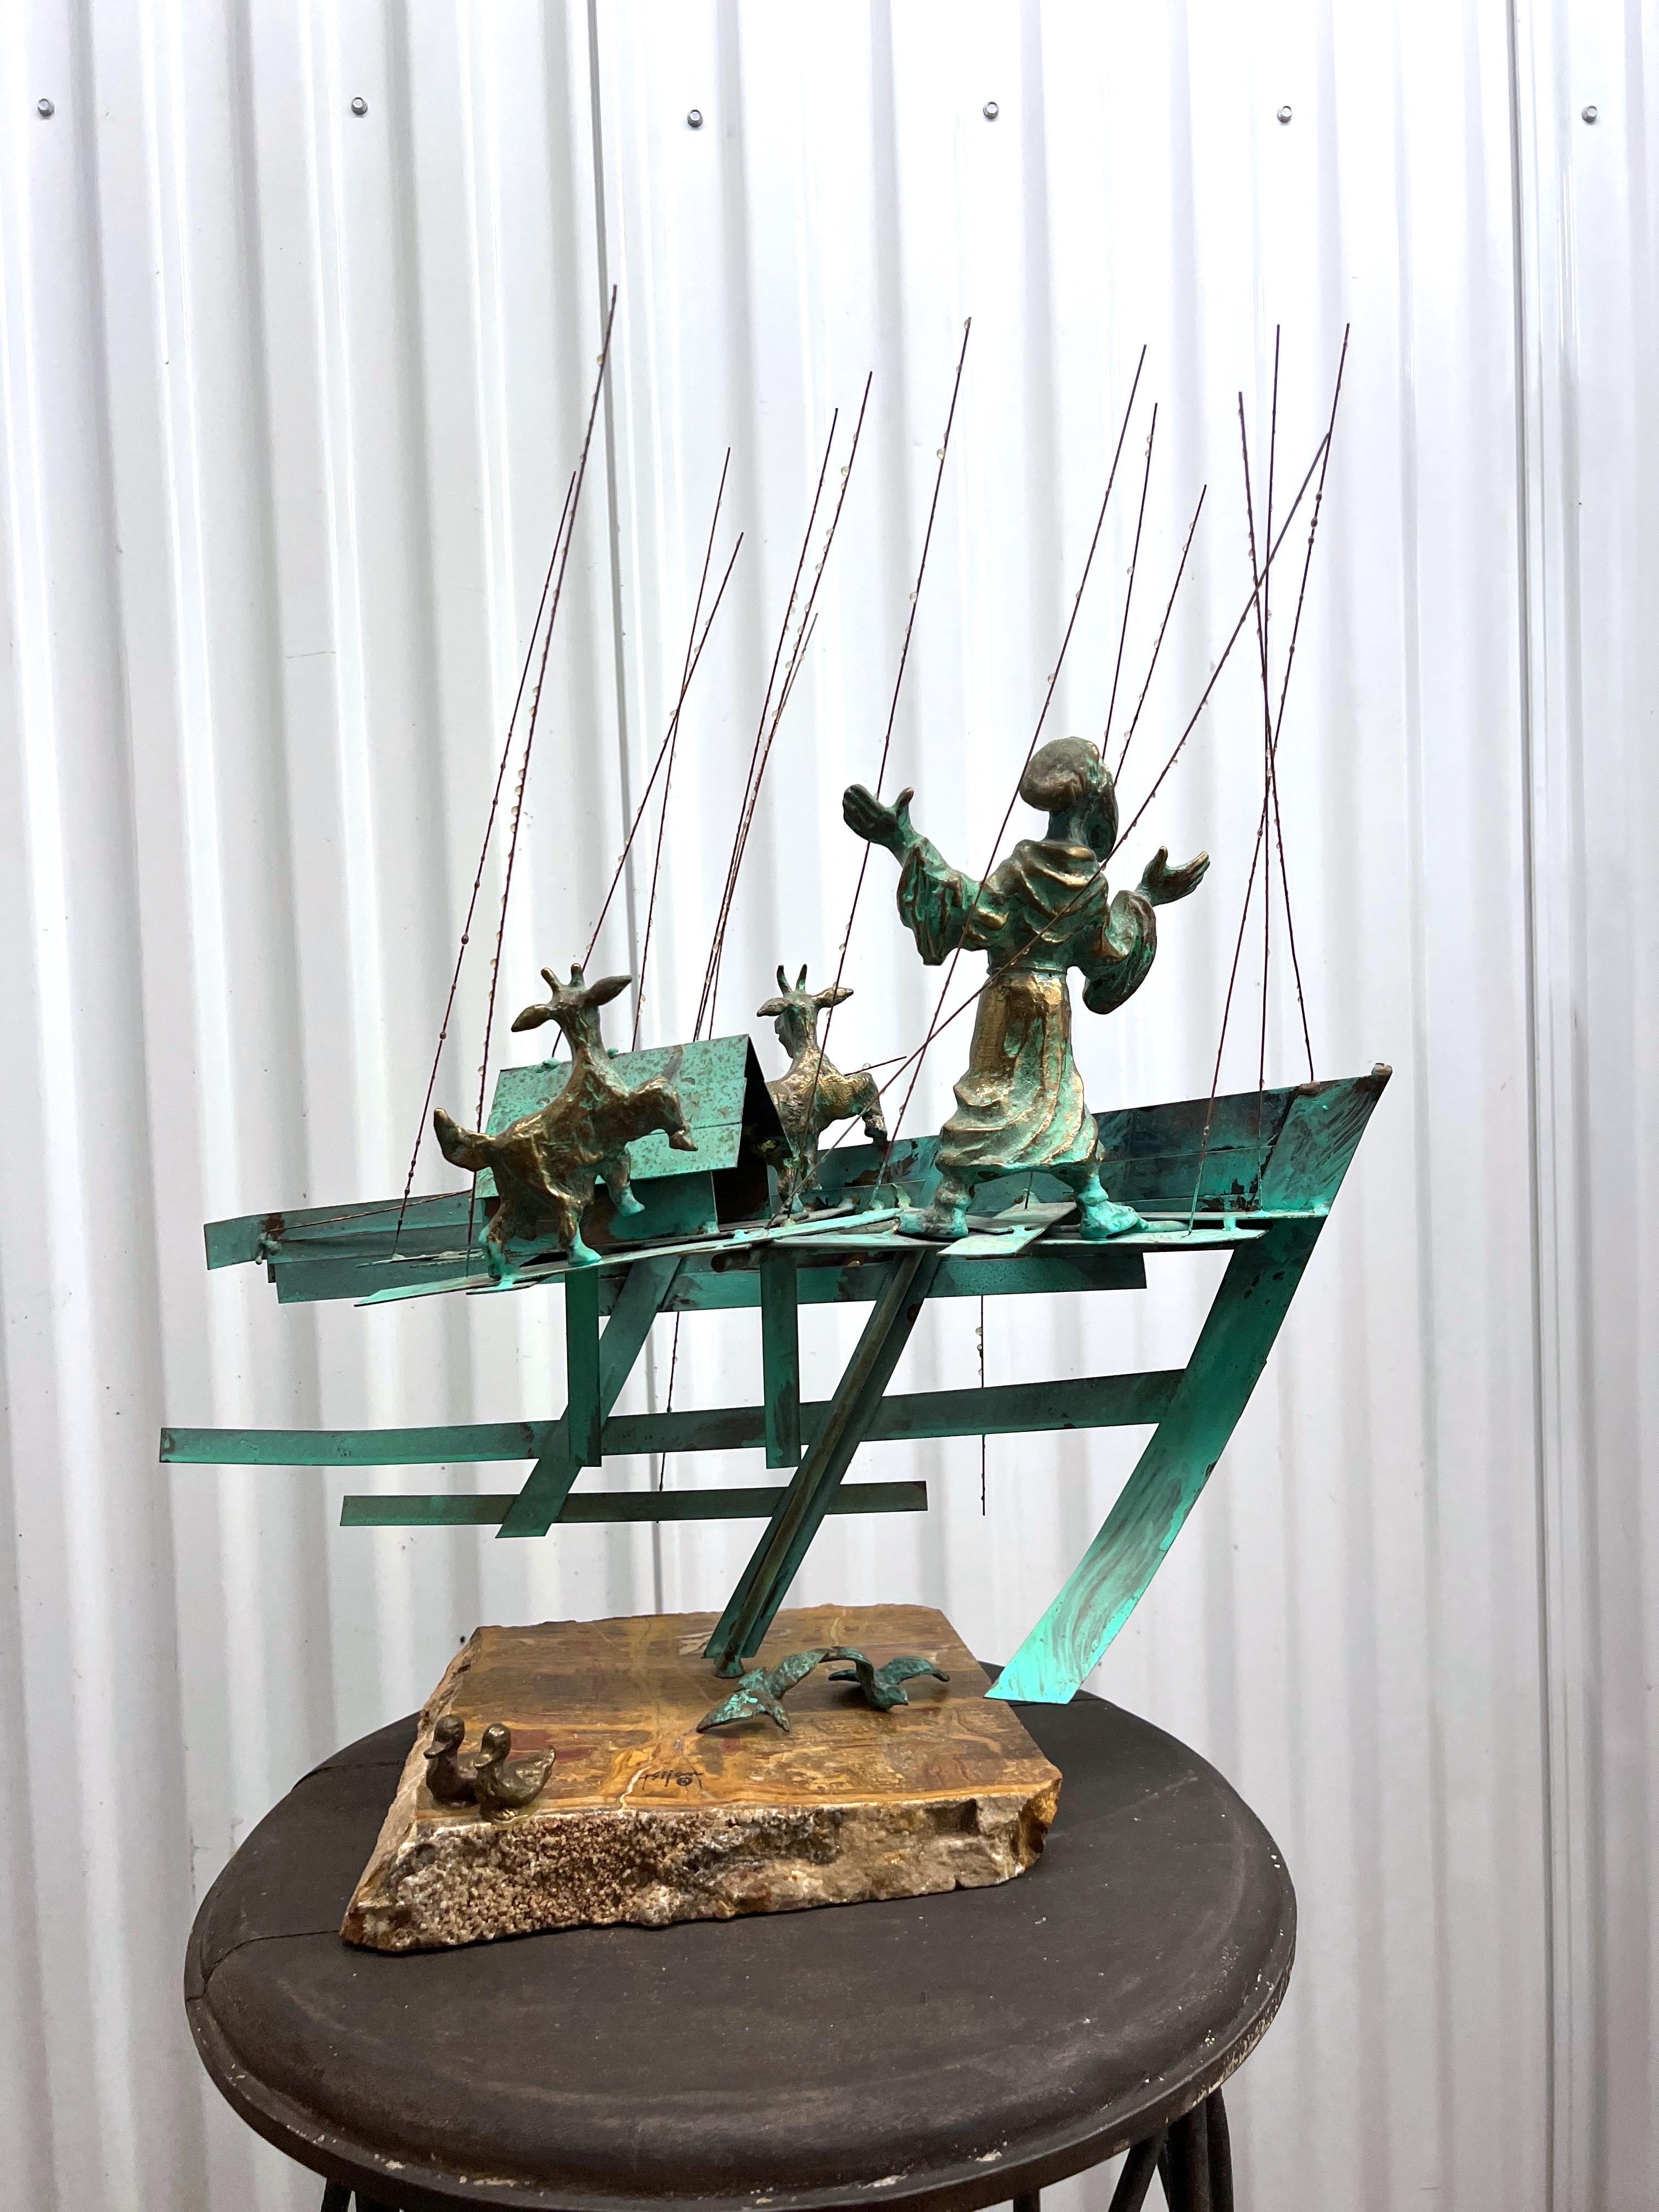 Bijan Signed Metal Art Sculpture of Man on Boat with Goats For Sale 5